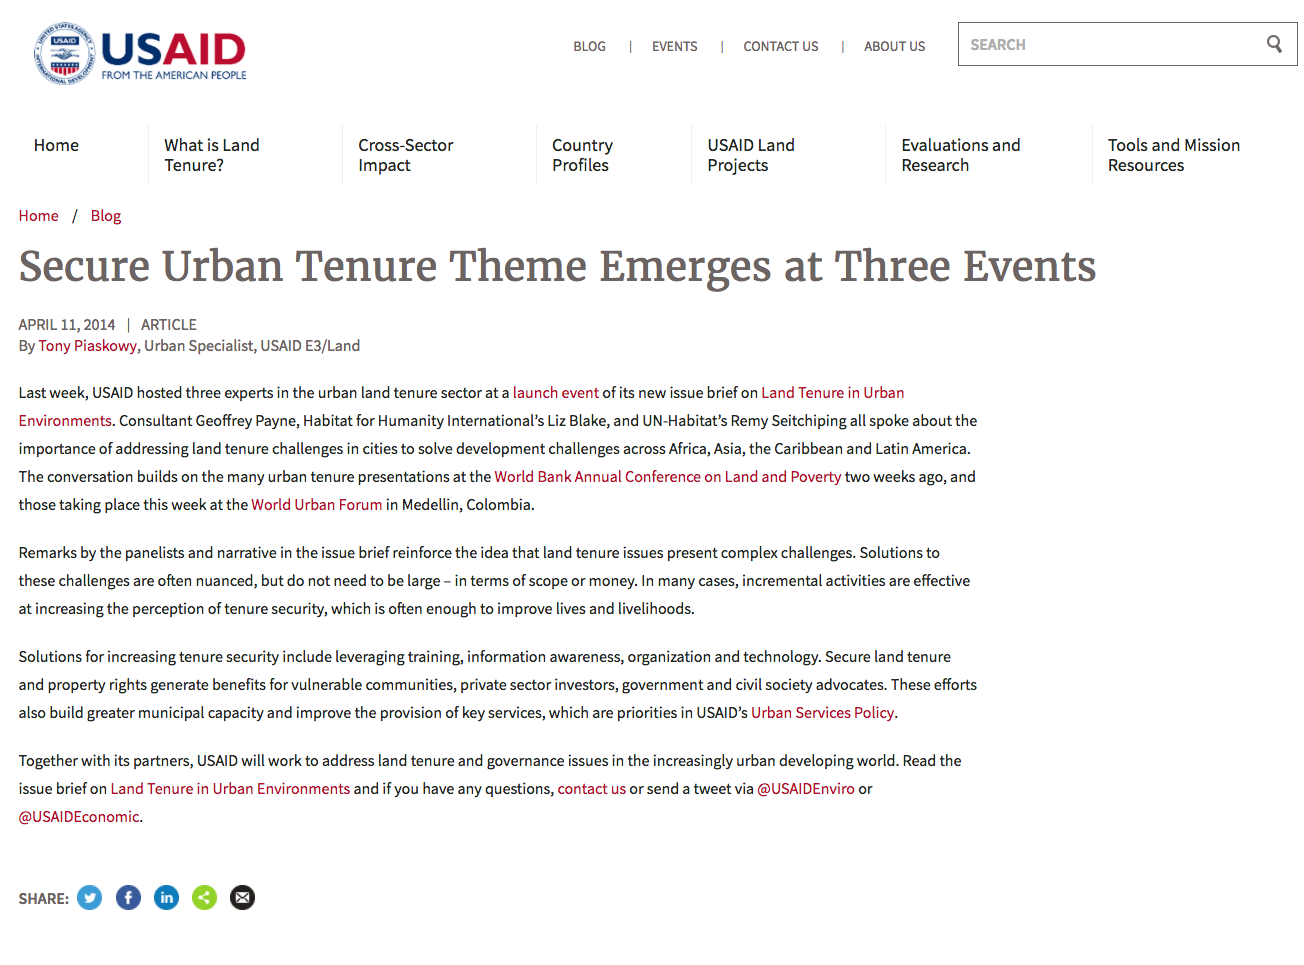 Secure Urban Tenure Theme Emerges at Three Events cover image